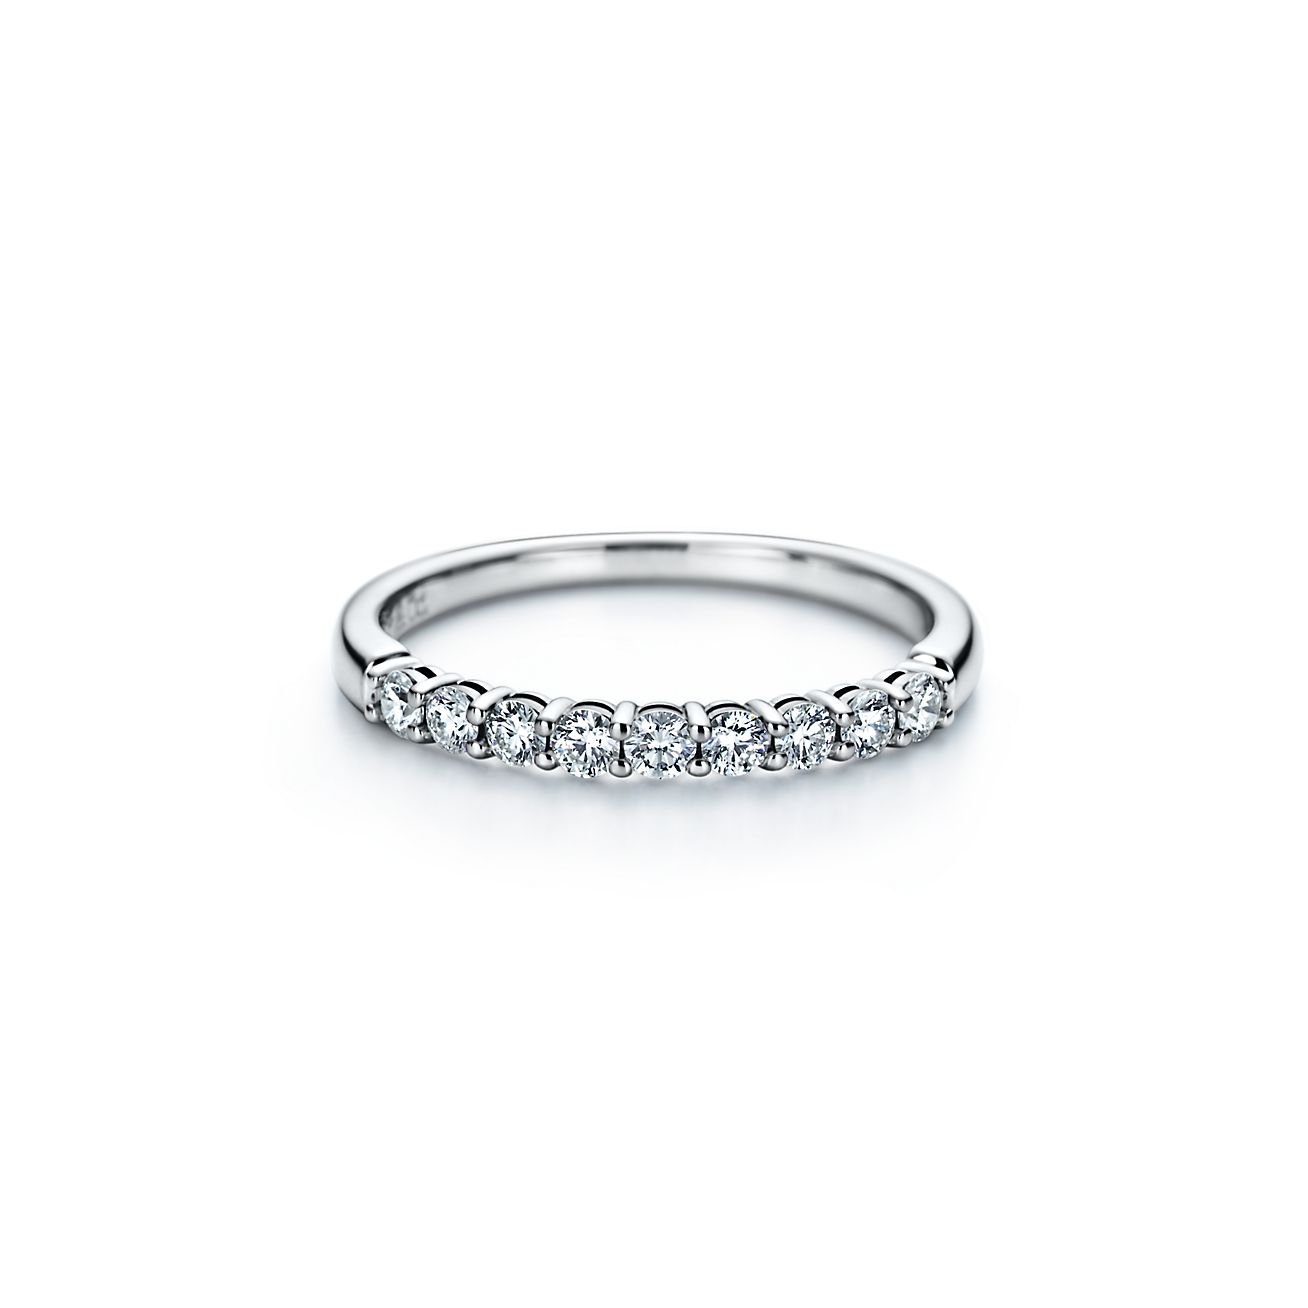 Tiffany & Co.® band ring in 18k gold with diamonds, 3 mm. | Tiffany & Co.